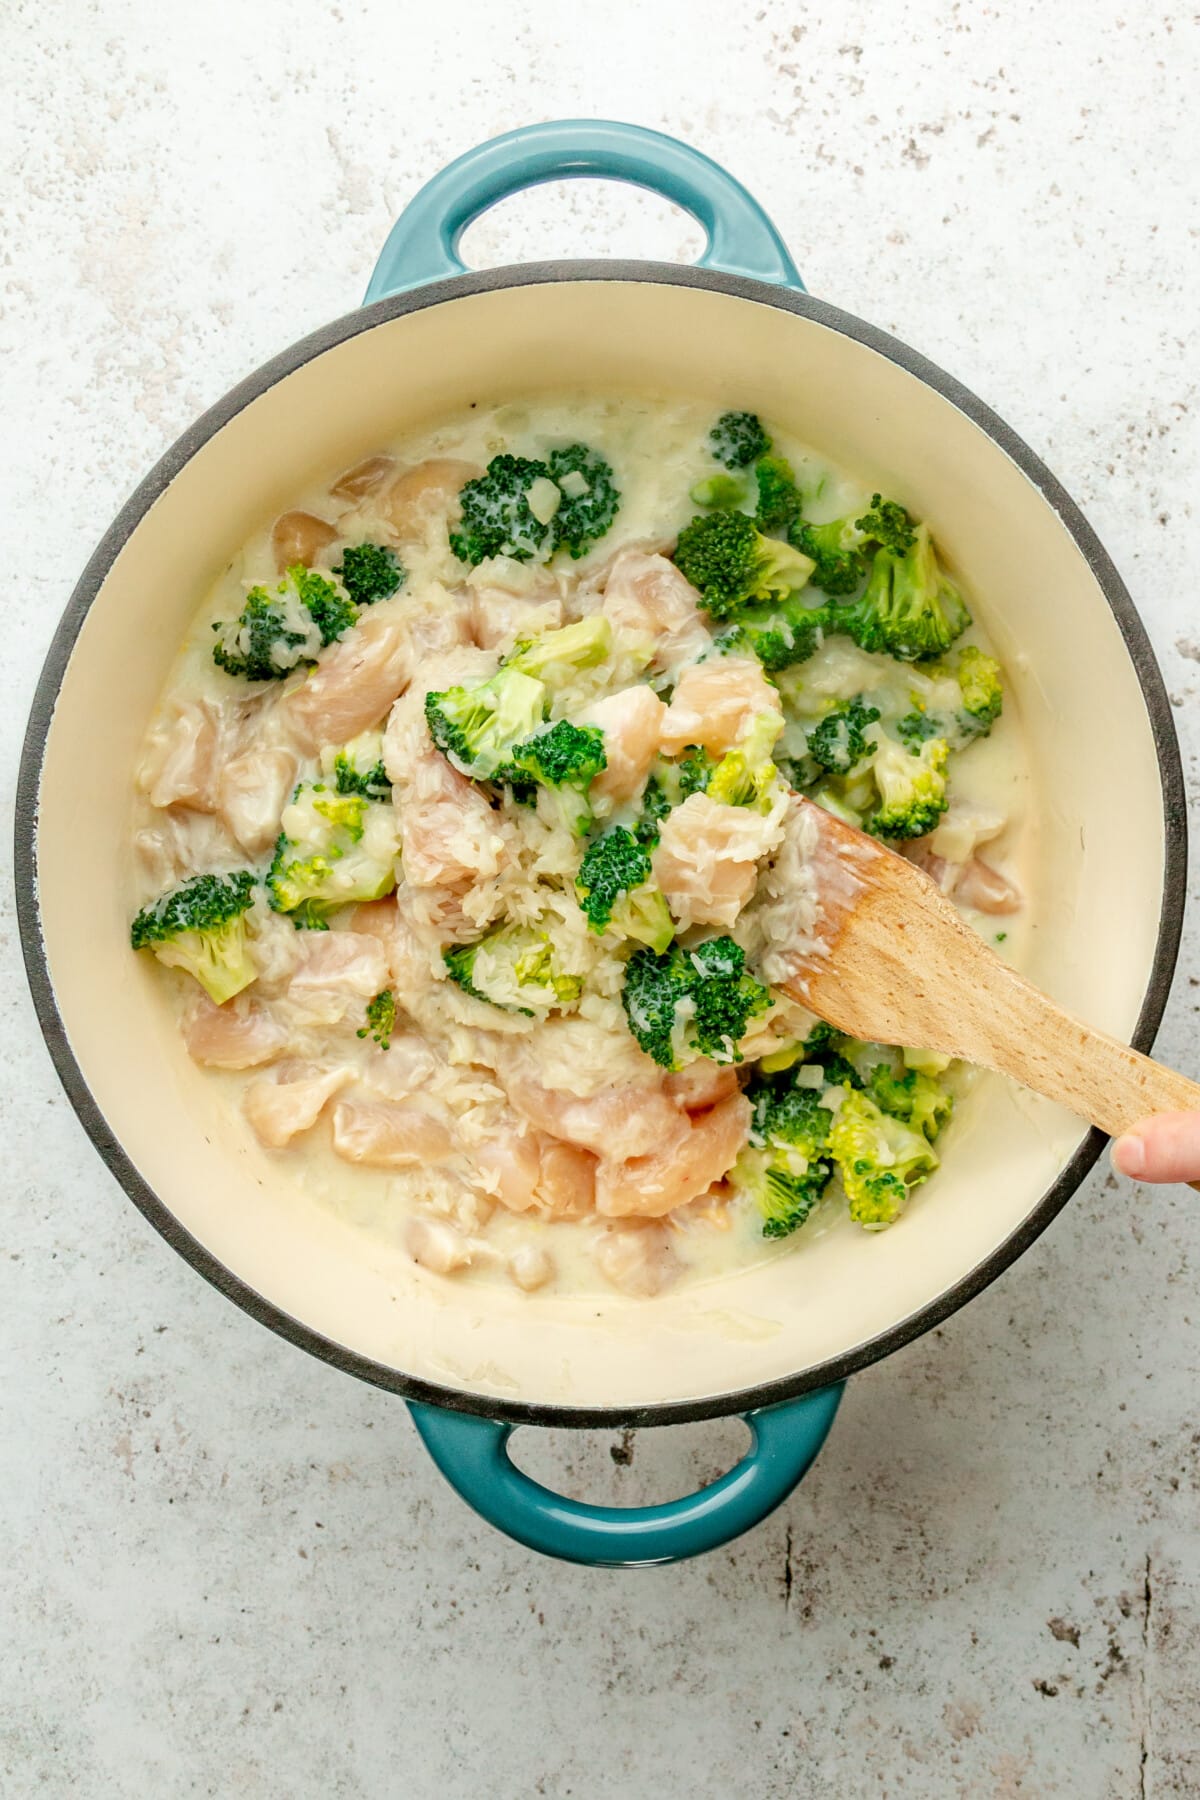 Rice, broccoli florets and chicken cubes are stirred in a Dutch oven on a light grey surface.